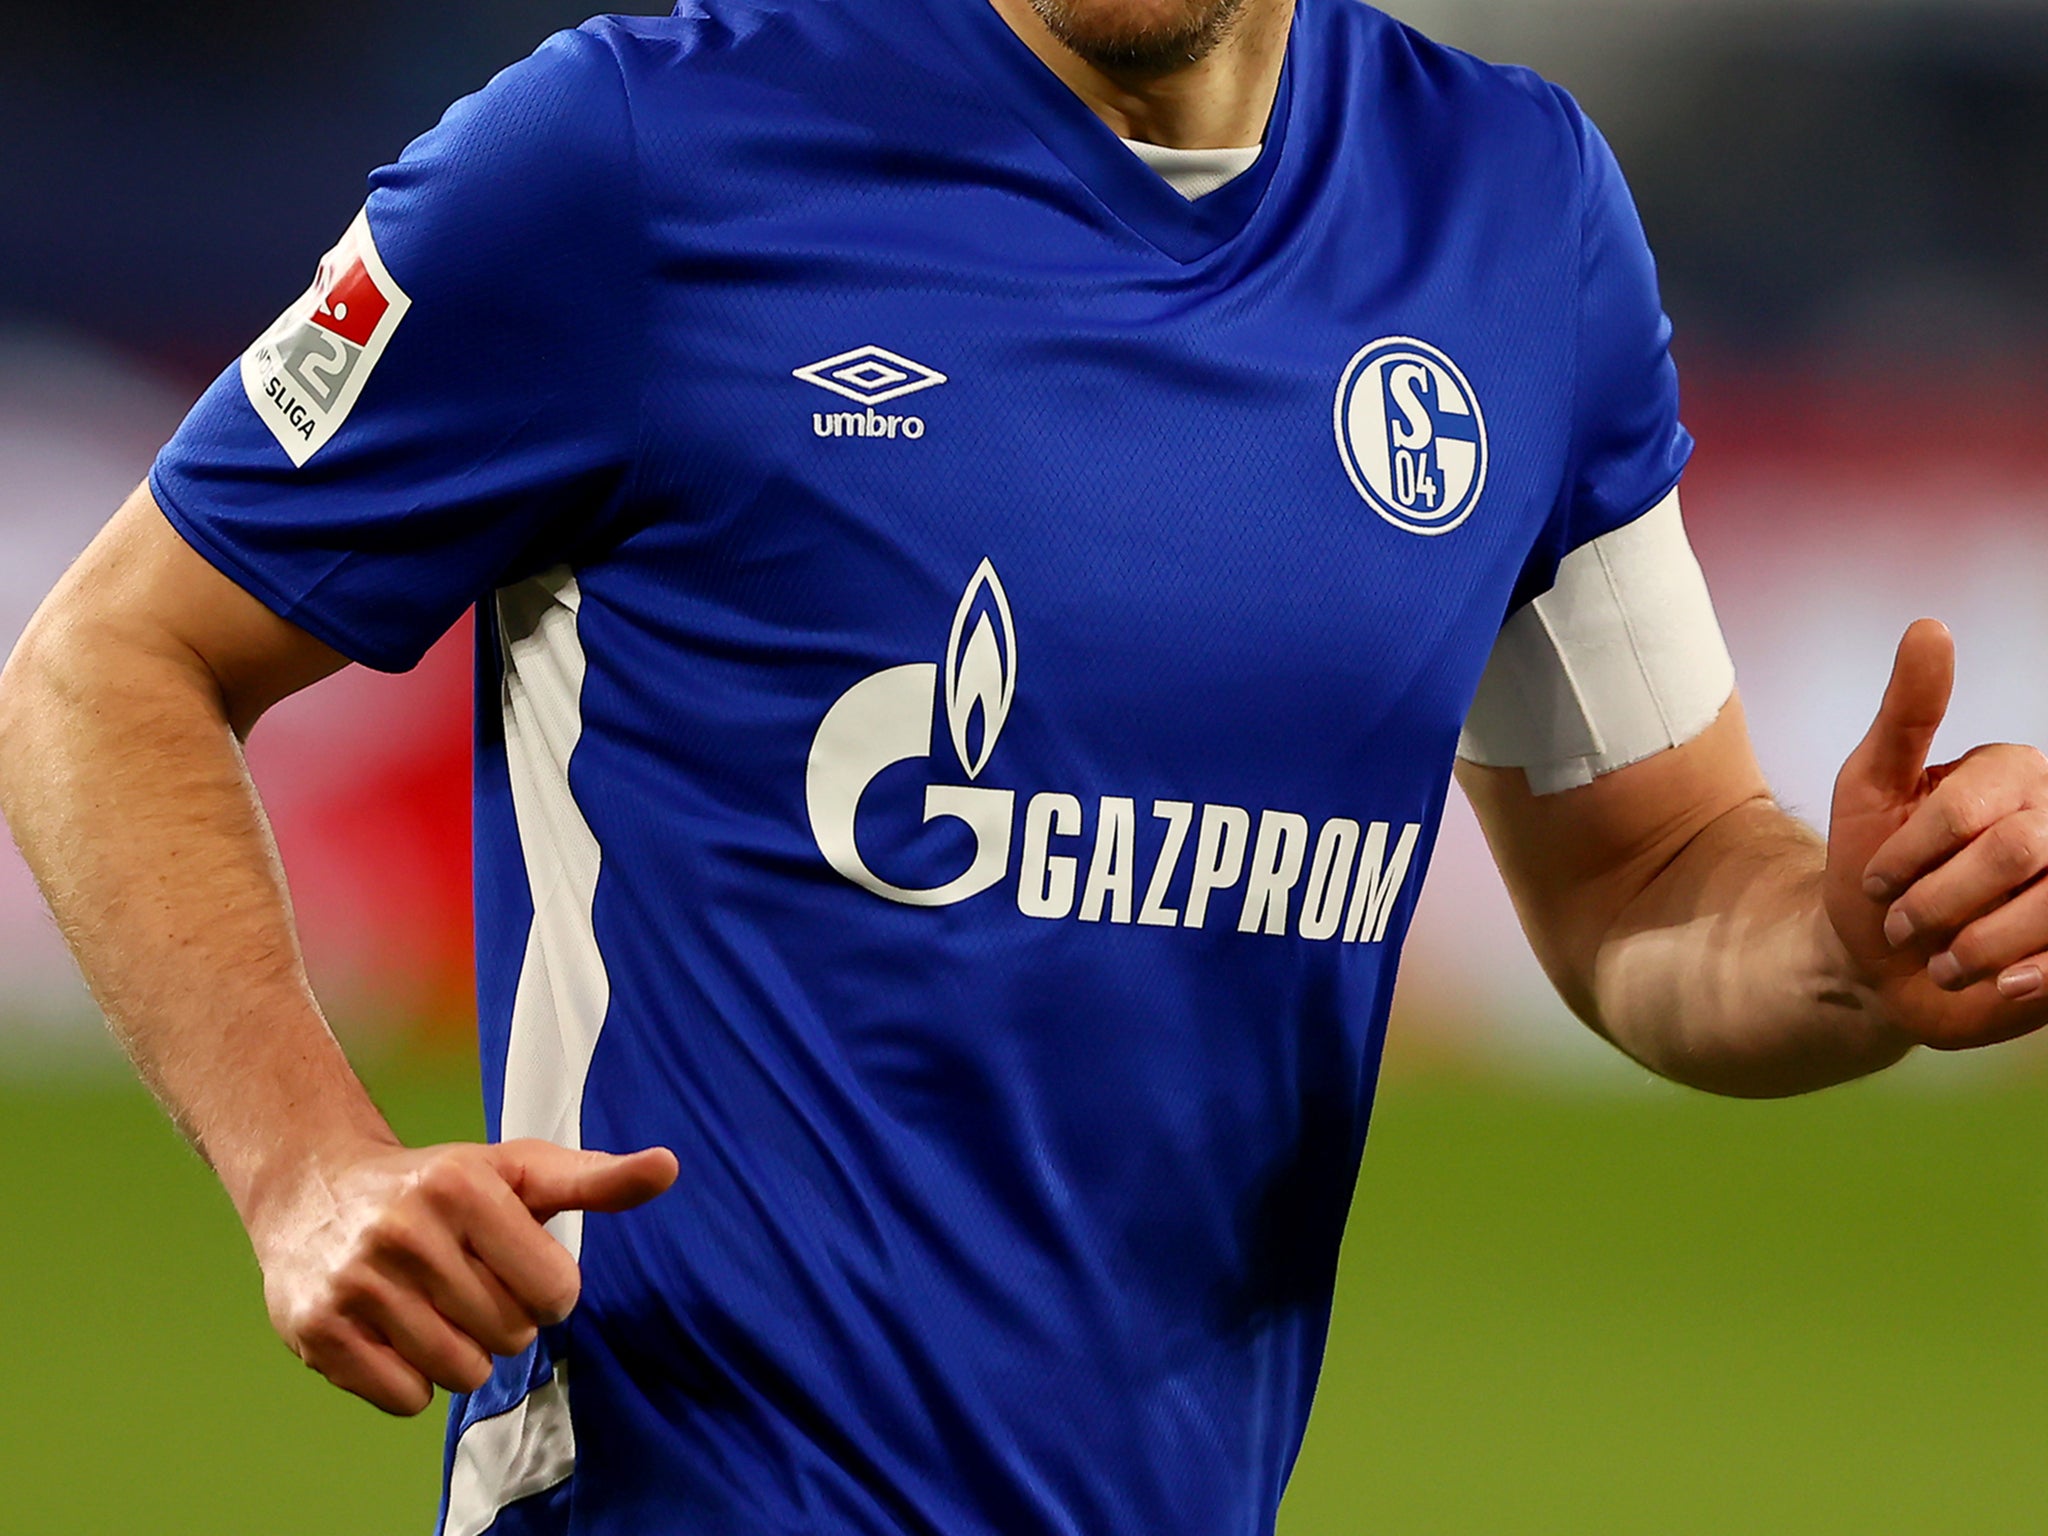 FC Schalke 04 has come under pressure to cut ties with Gazprom